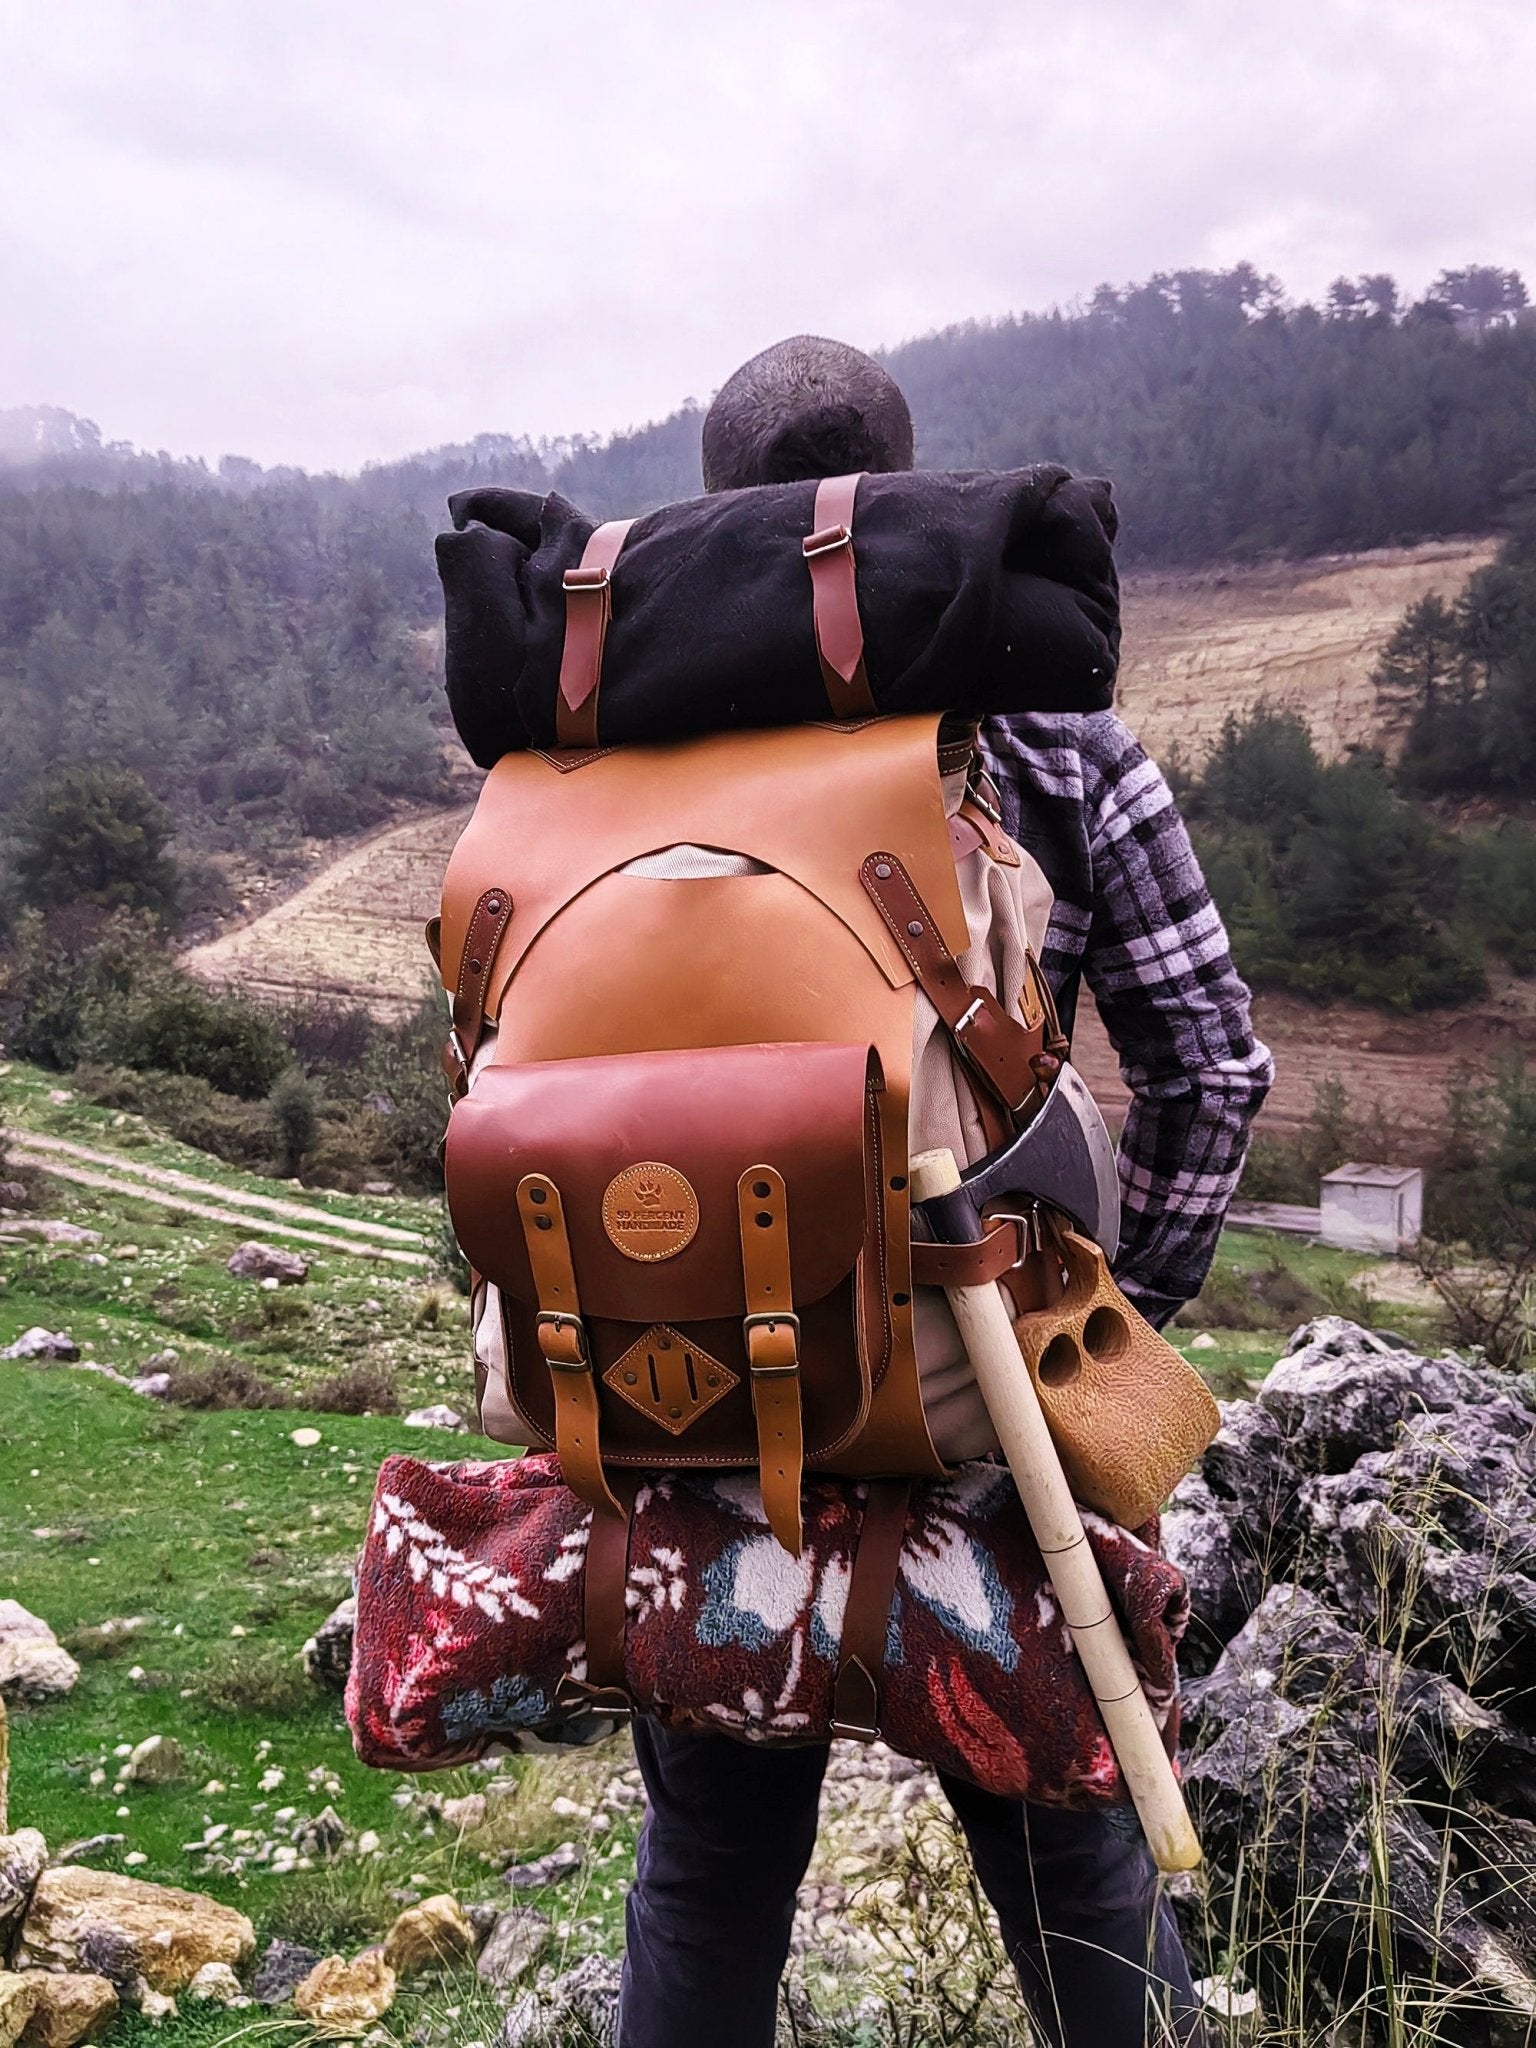 New Model | Handmade Leather and Waxed Backpack for Travel, Camping | inside 45 Liter | Personalization  99percenthandmade   